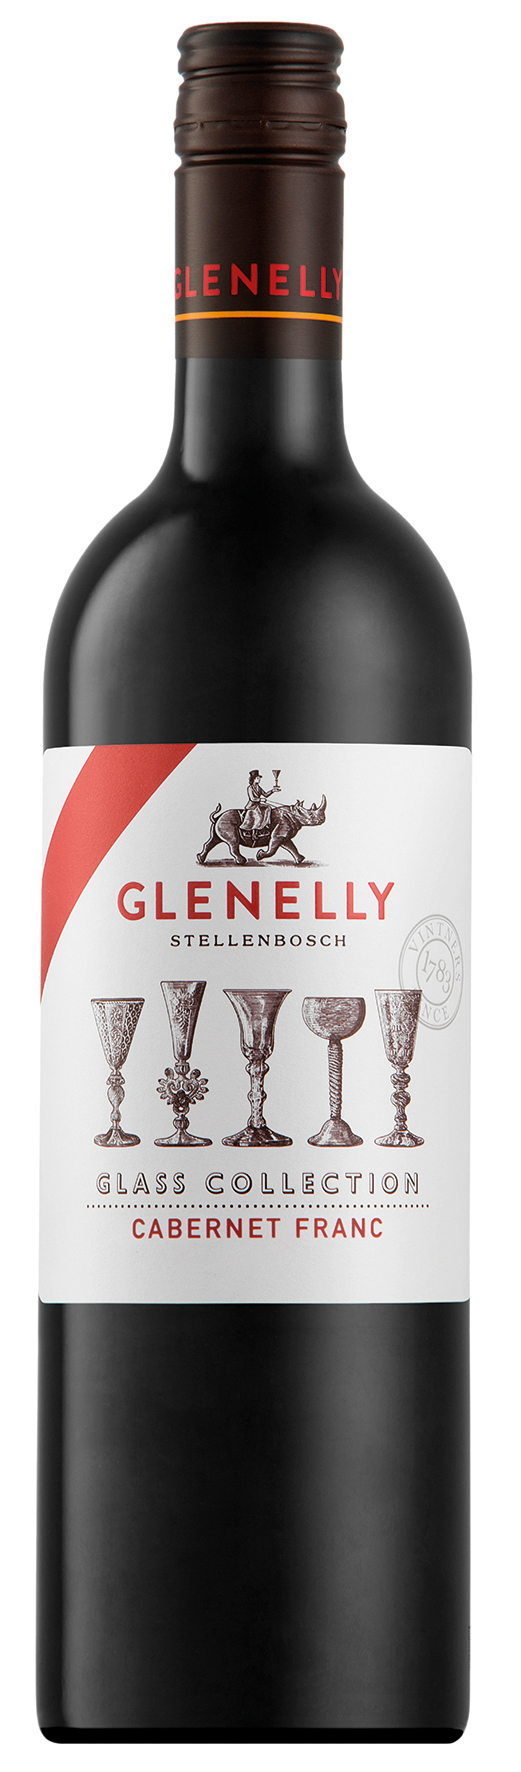 glenelly_glass_collection_cabernet_franc